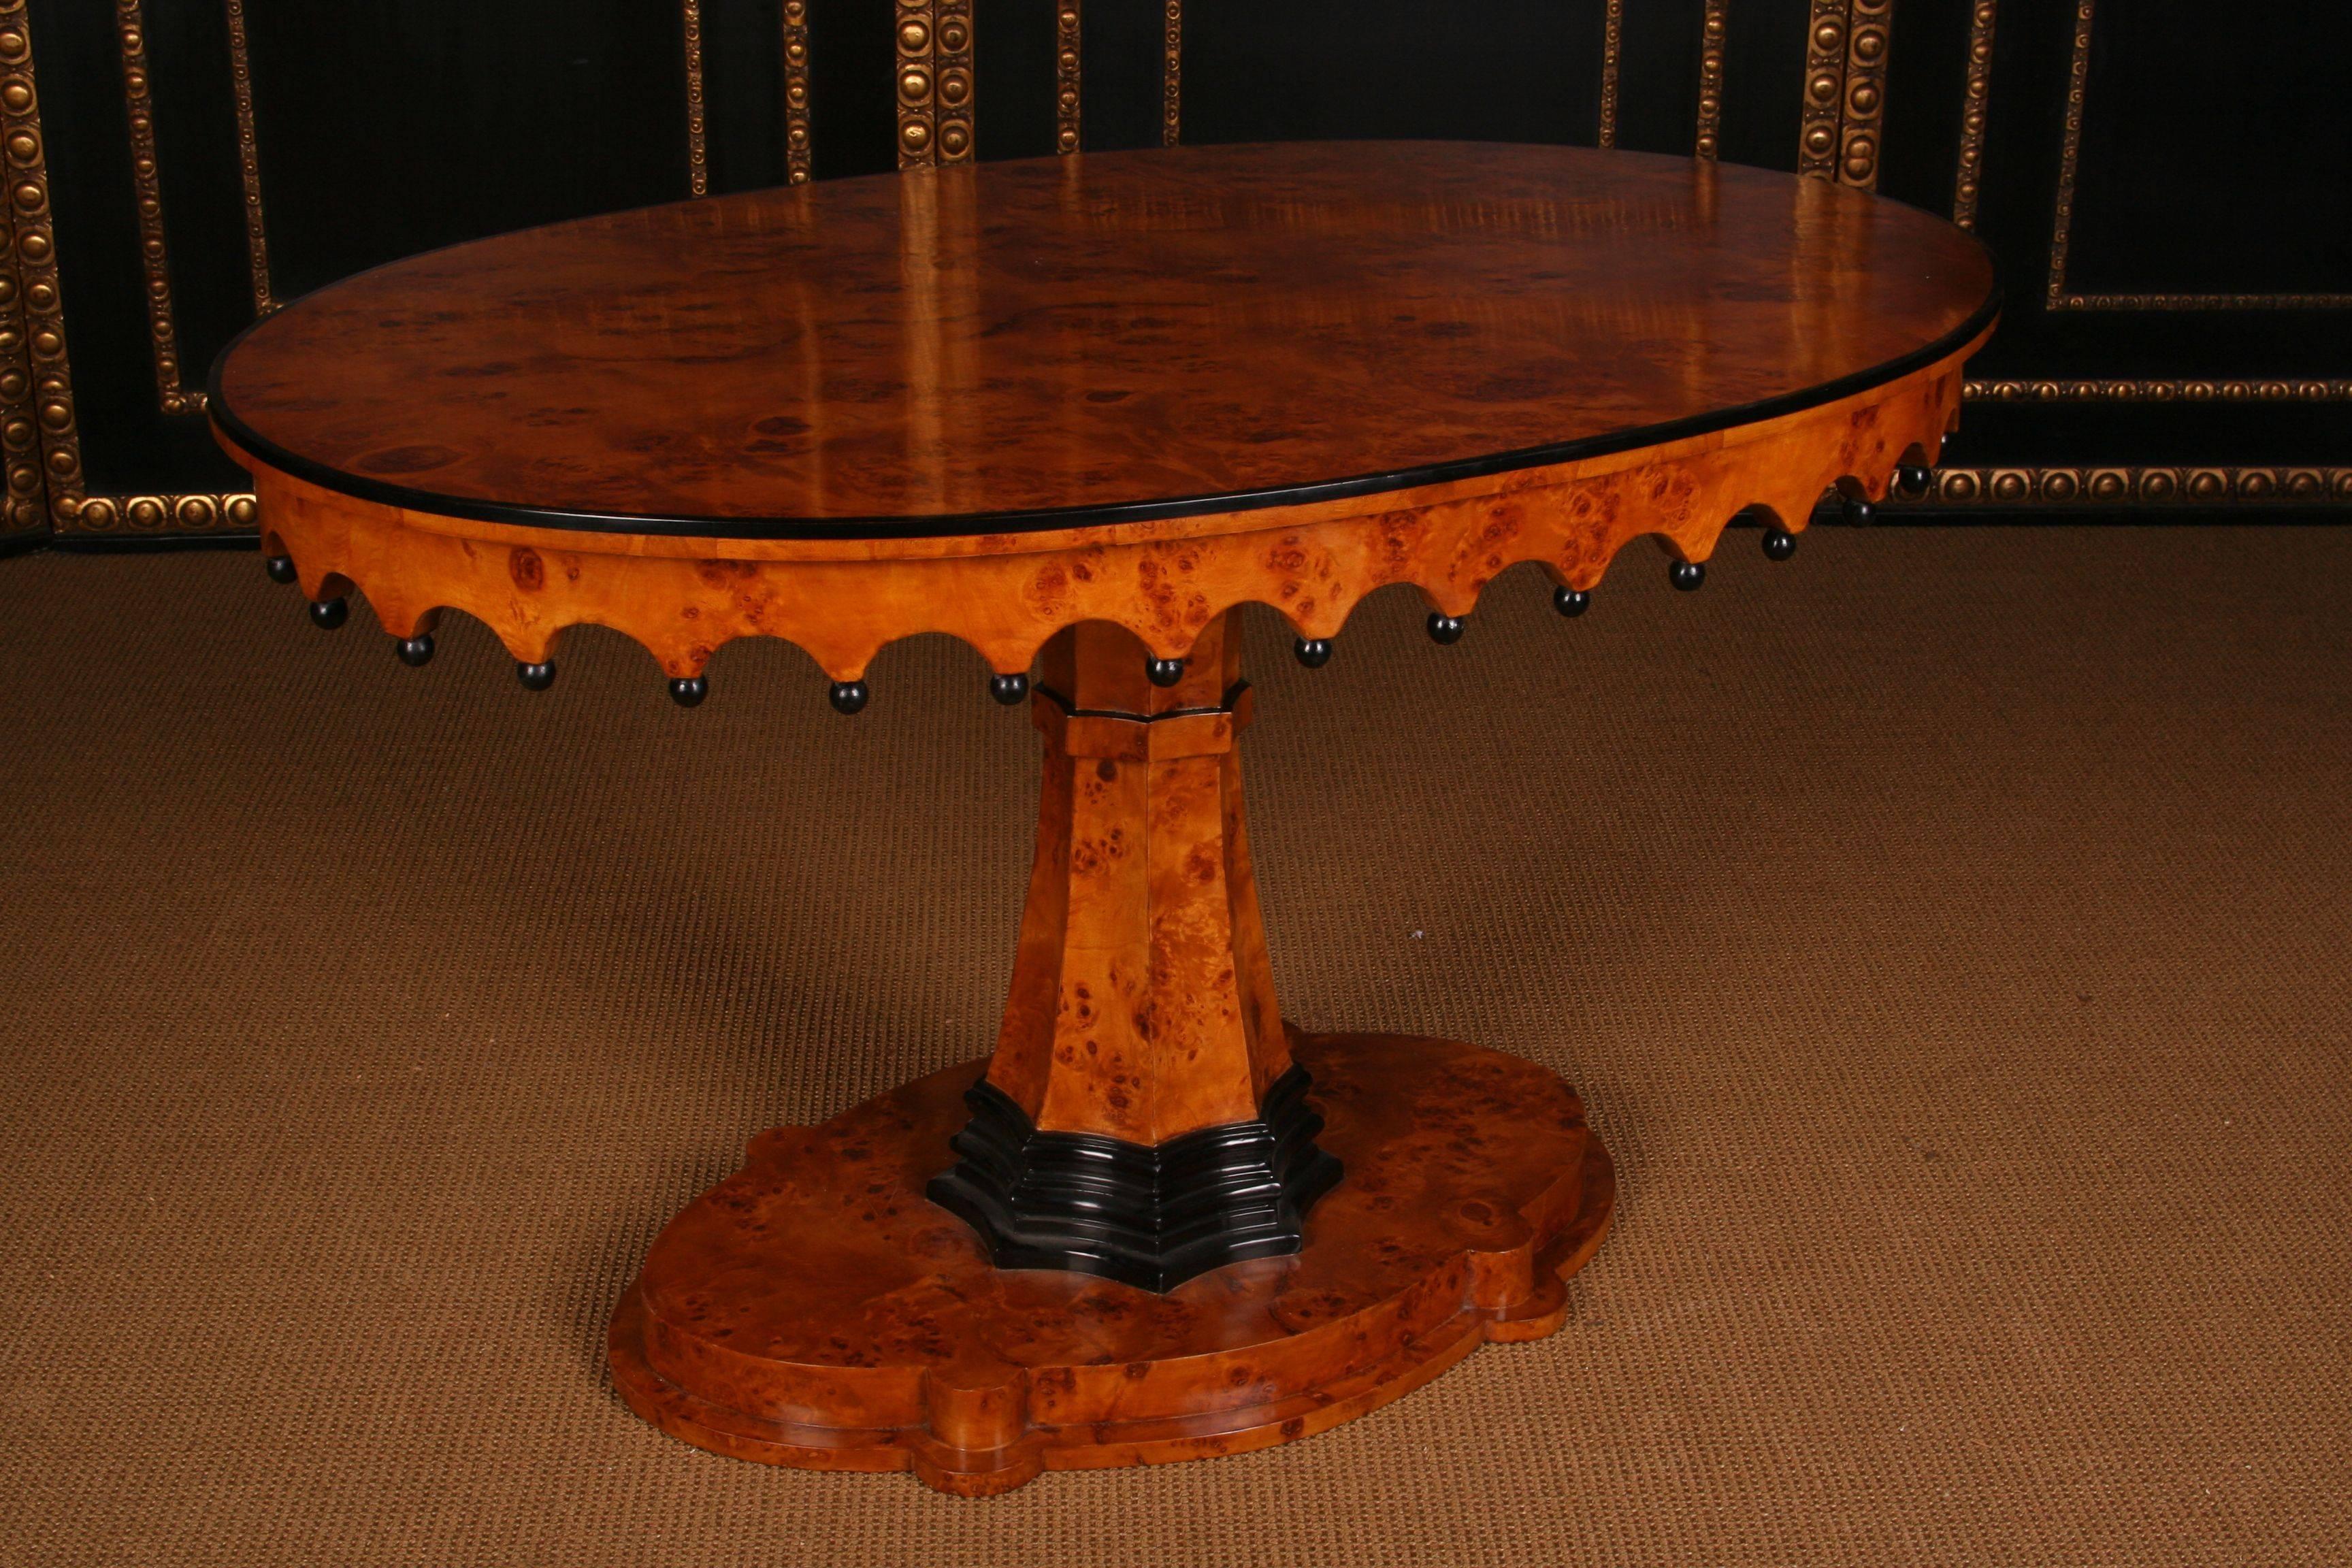 Exceptionally pretty oval table in Biedermeier Style.
Bird’s eye maple on solid wood, partially blackened. Oval cambered and profiled pedestal. Middle ascending, eight cornered fan-shaped column shanks, partially blackened. Gothic border with